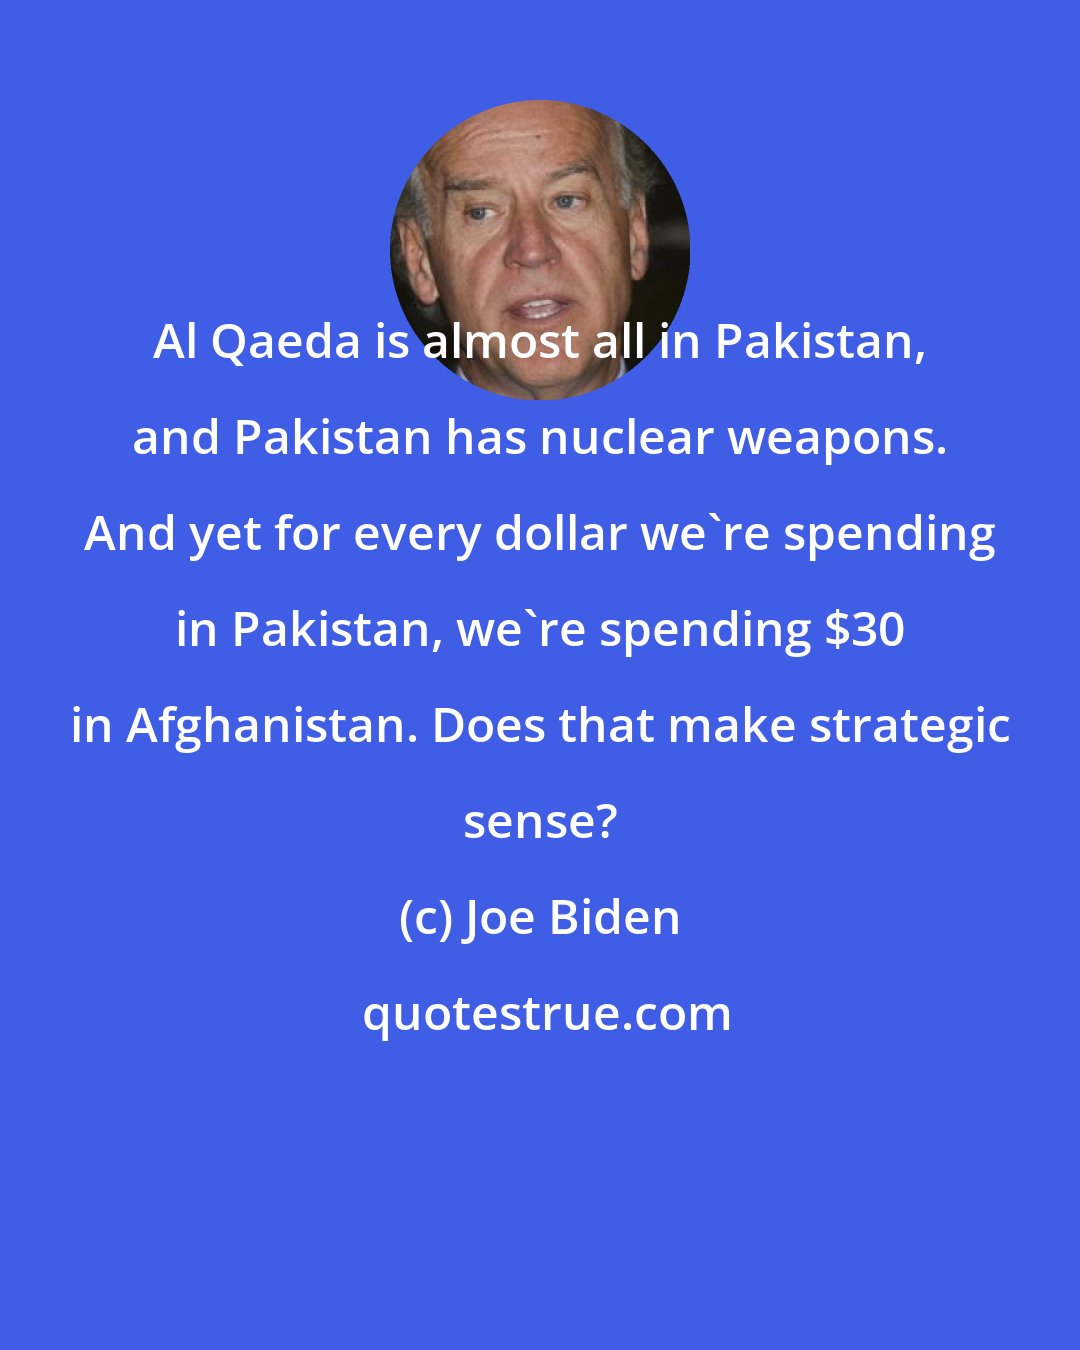 Joe Biden: Al Qaeda is almost all in Pakistan, and Pakistan has nuclear weapons. And yet for every dollar we're spending in Pakistan, we're spending $30 in Afghanistan. Does that make strategic sense?